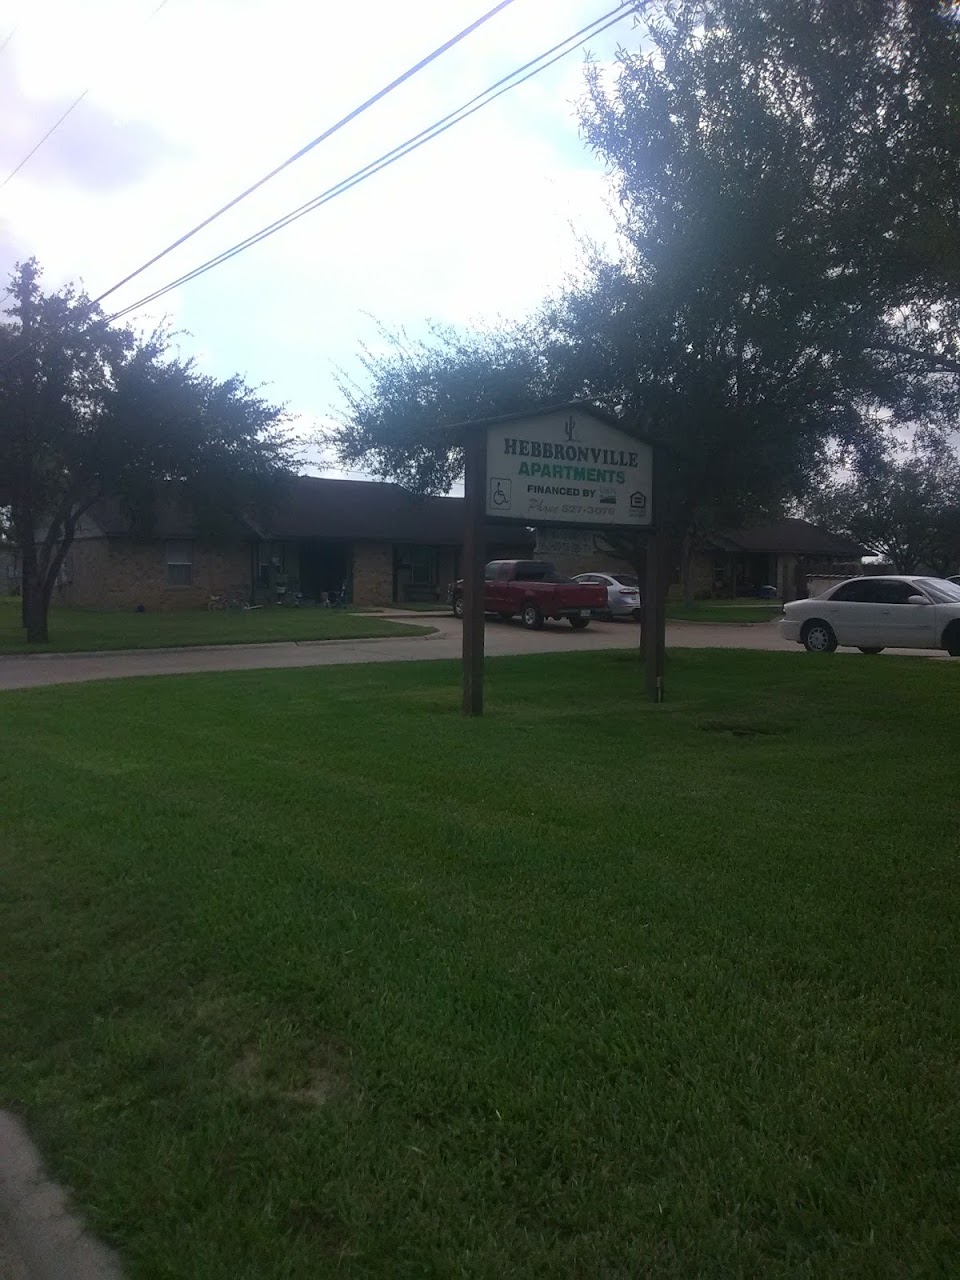 Photo of HEBBRONVILLE SENIOR APARTMENTS. Affordable housing located at 711 N SIGRID AVE HEBBRONVILLE, TX 78361